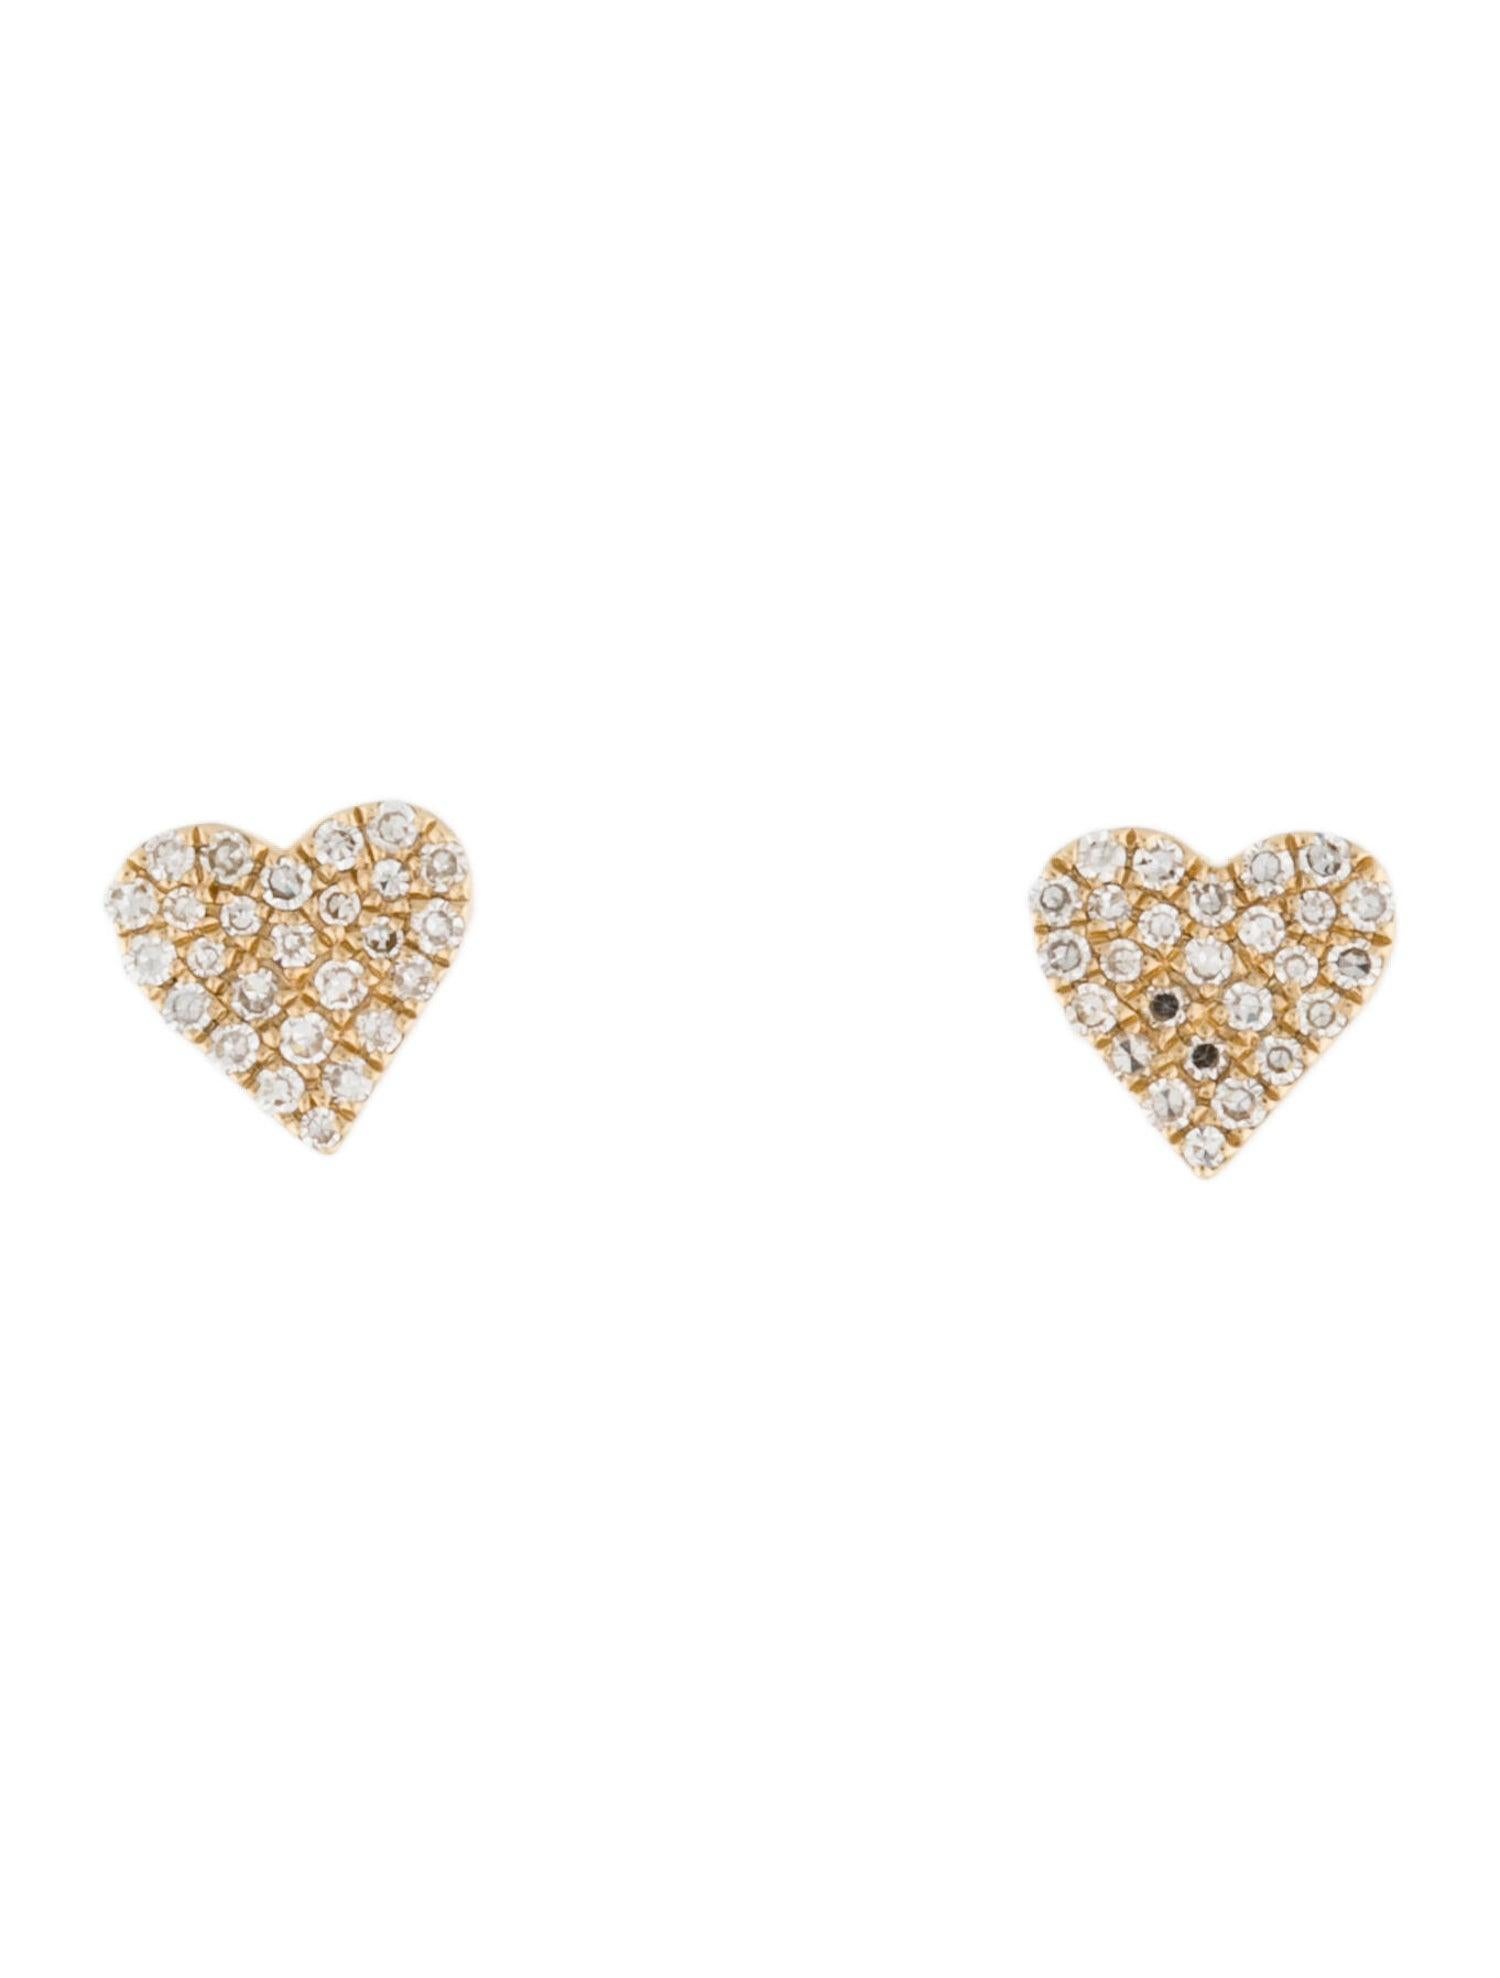 These Pretty and Chic Heart Stud Earrings are crafted of 14K Gold featuring approximately 0.14 ct. of round Diamonds, Color & Clarity is GH-SI1. Secured with Butterfly push backs.
-Diamond Weight: 0.14 ct.
-Diamond Clarity: SI
-Diamond Color: